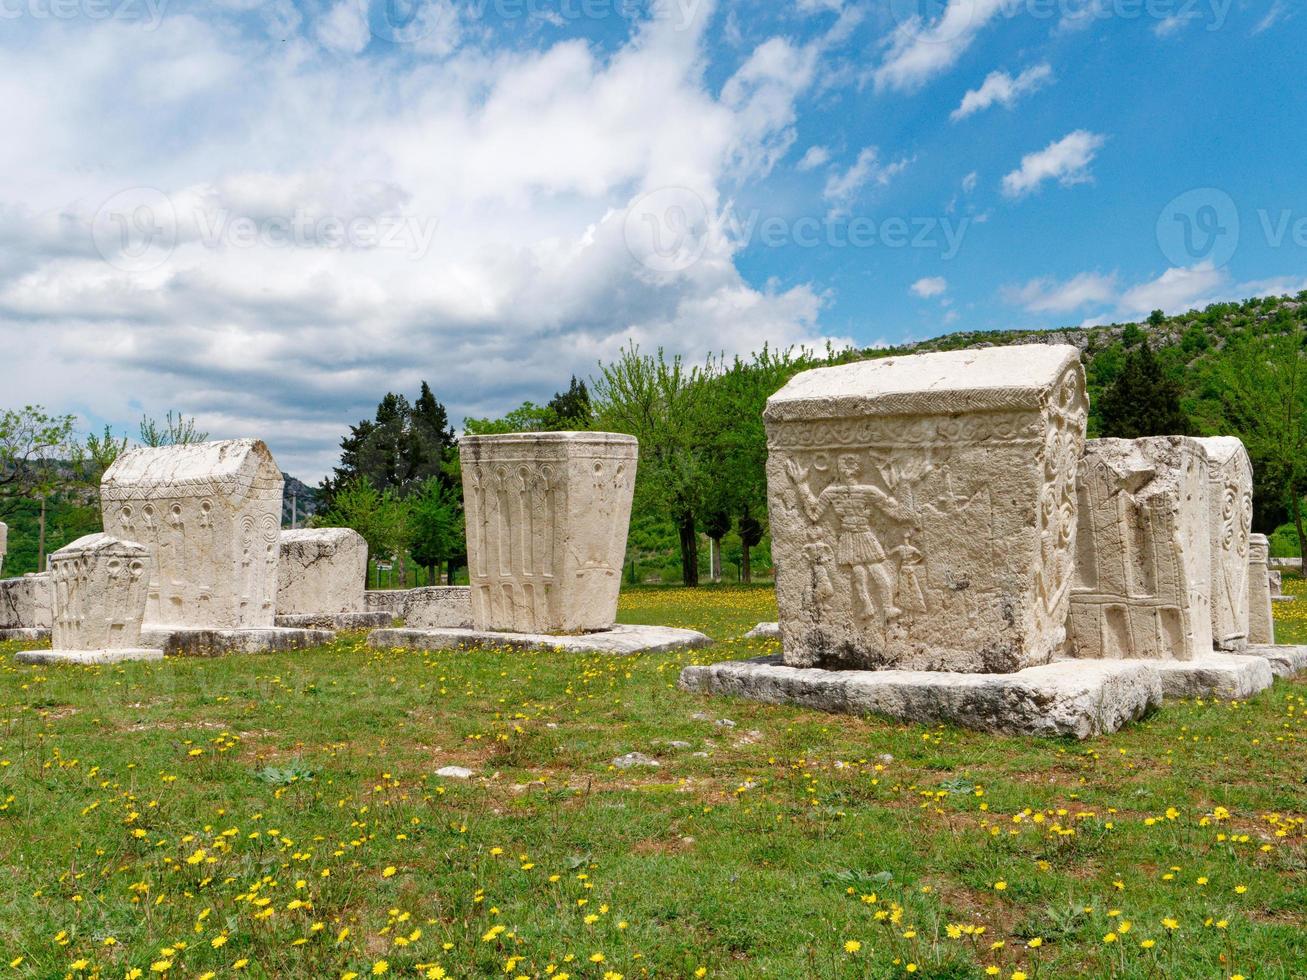 Stecci Medieval Tombstones Graveyards in Radimlja, Bosnia and Herzegovina. Unesco site. Historic place of interest. The tombstones feature a wide range of decorative motifs and inscriptions. photo